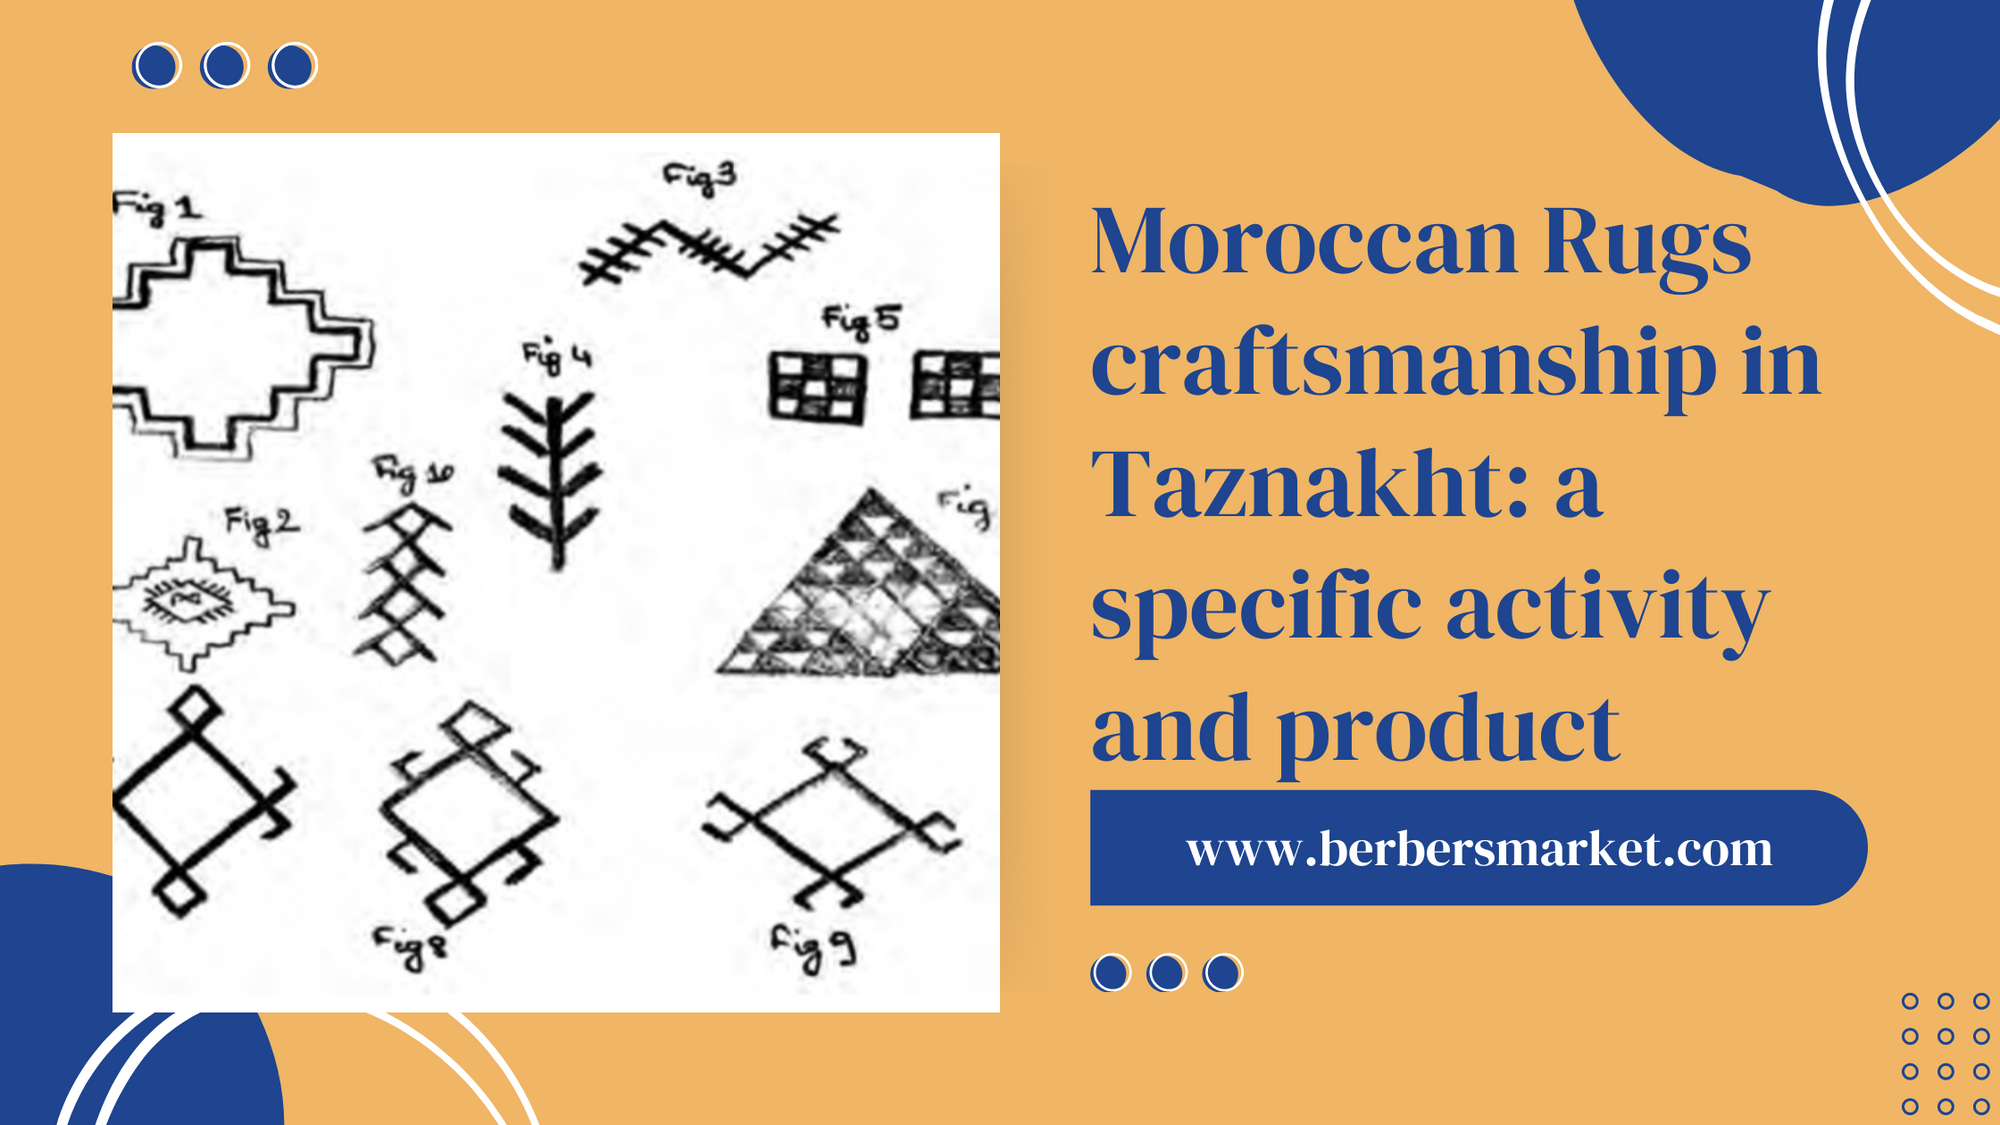 Blog banner talking about: "Moroccan Rugs craftsmanship in Taznakht: a specific activity and product" with a picture showing The main decorative symbols of handmade Moroccan rugs.